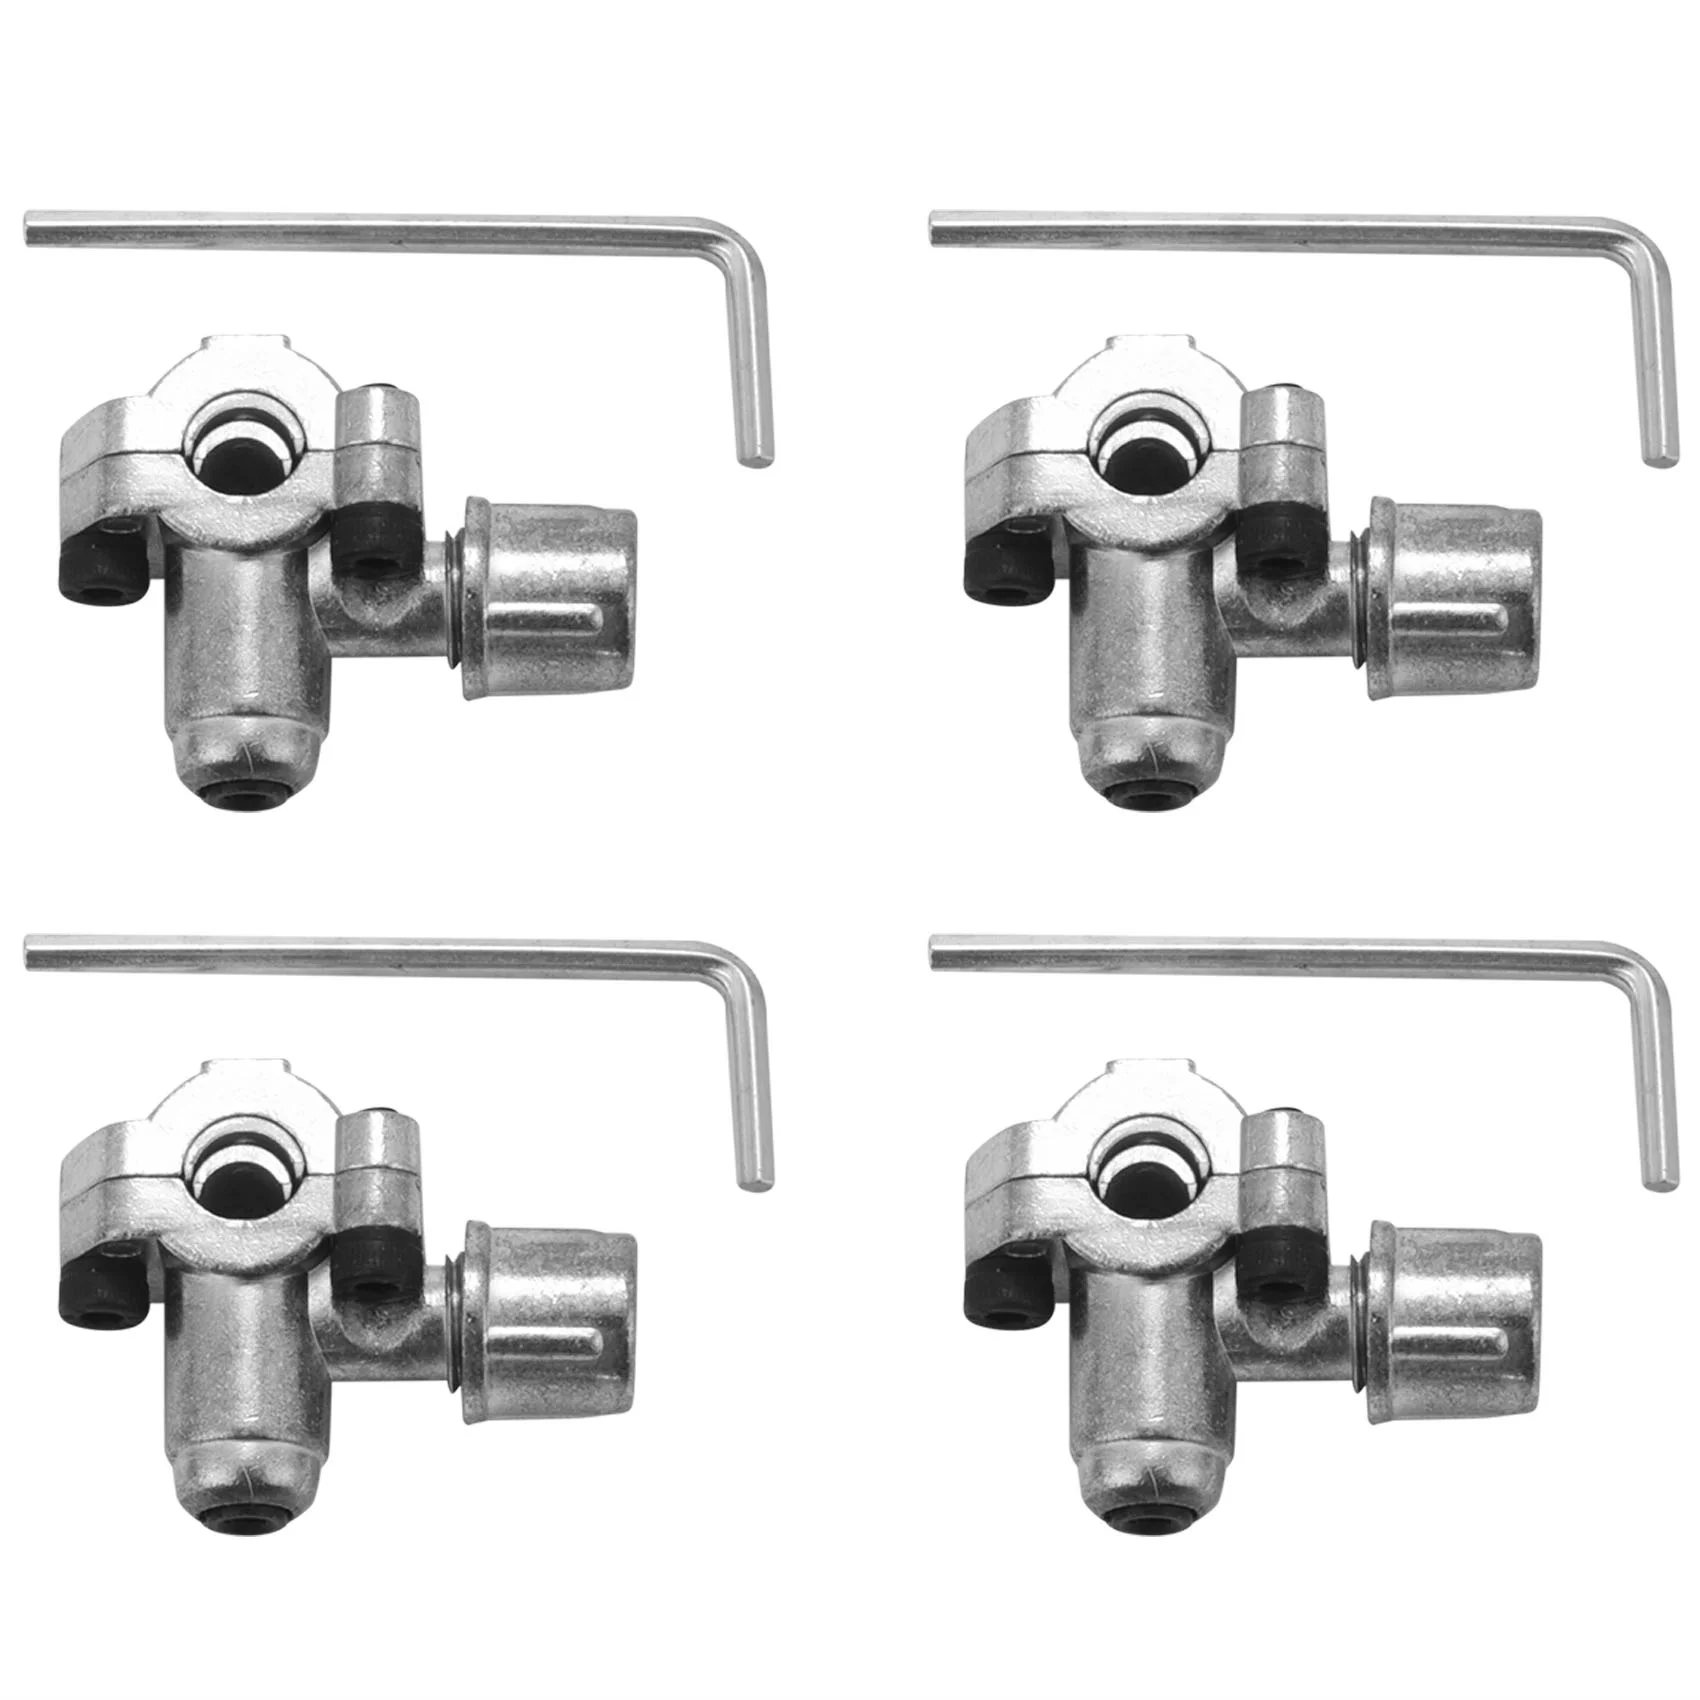 

4 Pack BPV-31 Piercing Valve Line Tap Valve Kits Adjustable for Air Conditioners HVAC 1/4 Inch,5/16 Inch,3/8 Inch Tubing